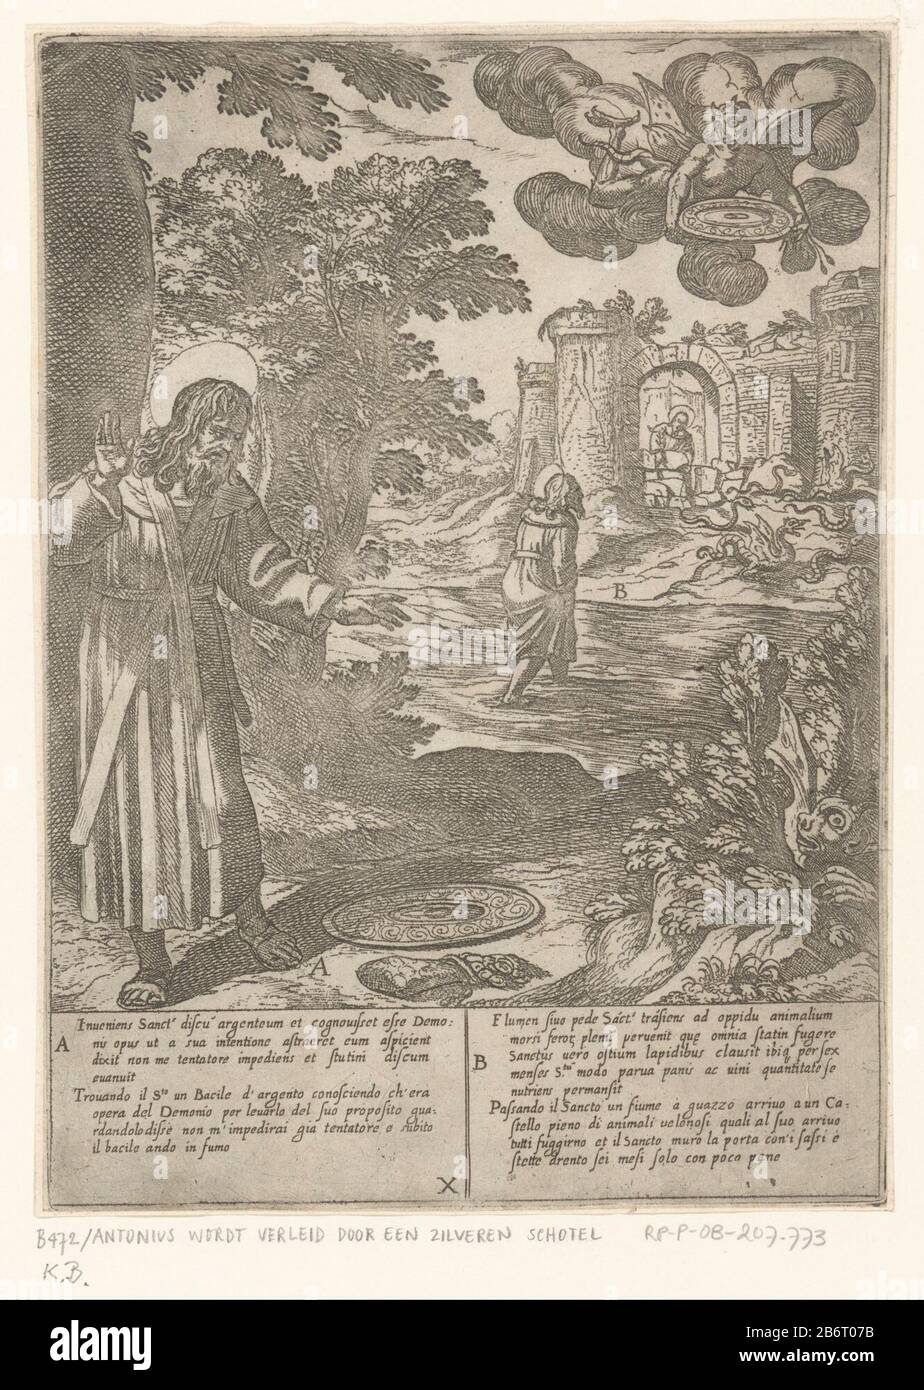 H Antonius in verleiding gebracht door een zilveren schotel Het leven van de heilige Antonius de Grote (serietitel) St. Anthony is tempted by a silver platter is placed on the ground by a devil who has the bushes constipated. In the background Antony at a gate with snakes and dragons. Italian and Latin text in two columns in the ondermarge. Manufacturer : printmaker Antonio Tempesta to mural: Niccolò Circignaninaar painting by Giovanni Battista Lombardelliuitgever: Giovanni Orlandiverlener of privilege unknown dedicated to: Cinzio Passeri Aldobrandiniopgedragen by Antonio Tempesta Place manufa Stock Photo